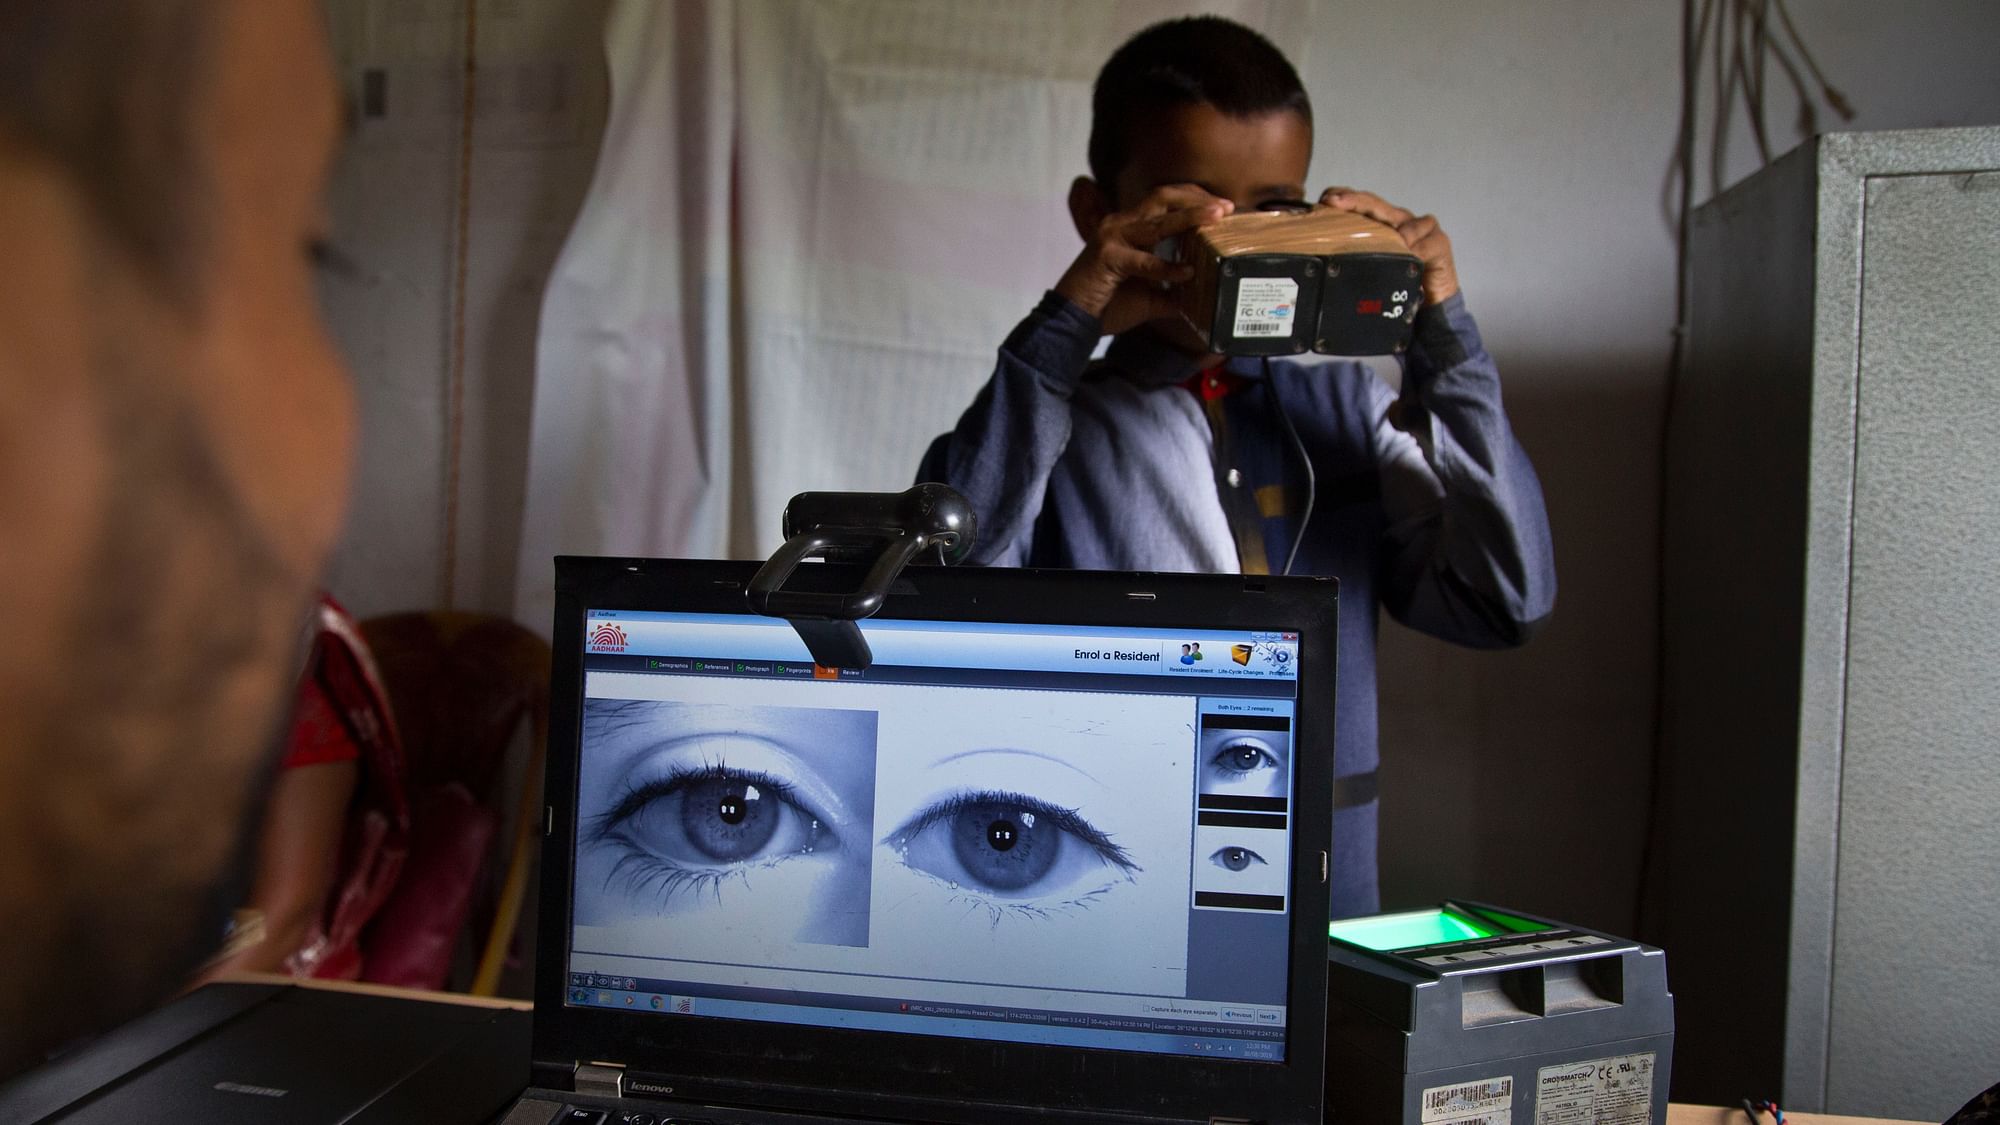 A National Register of Citizens (NRC) officer takes a photograph of the eyes of a boy at an NRC center.&nbsp;